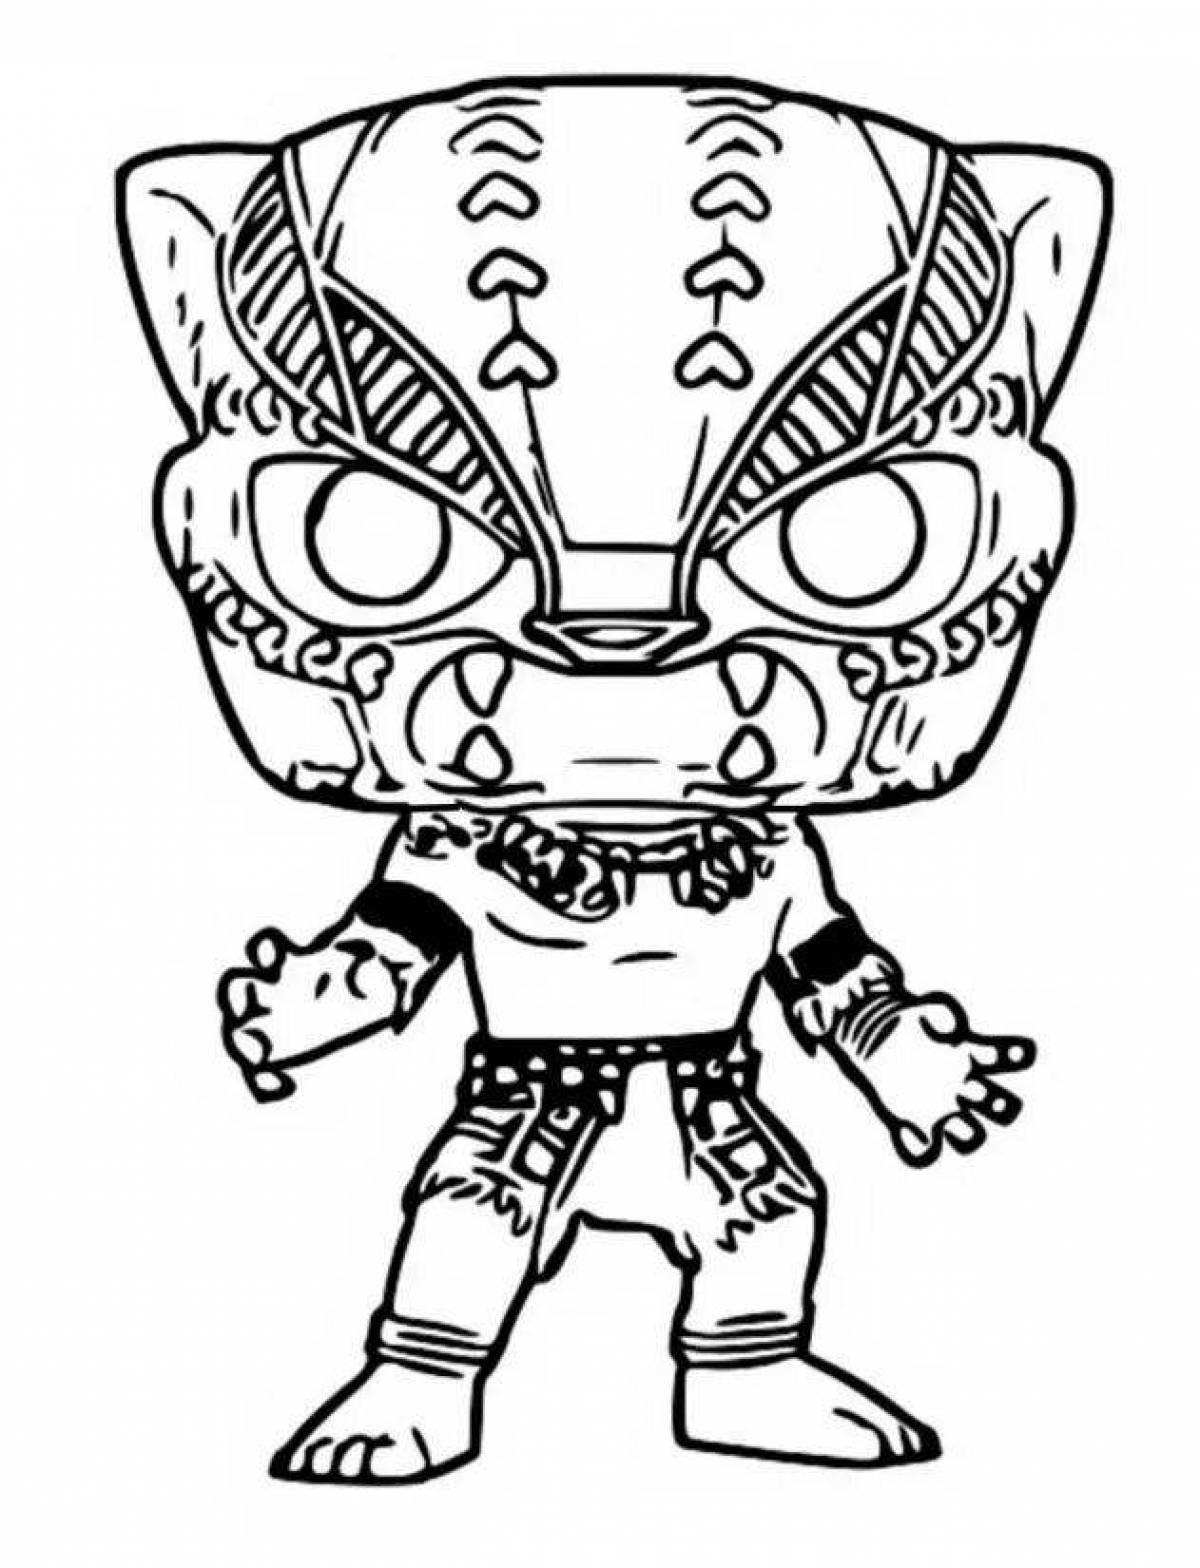 Dynamic funk pop coloring page